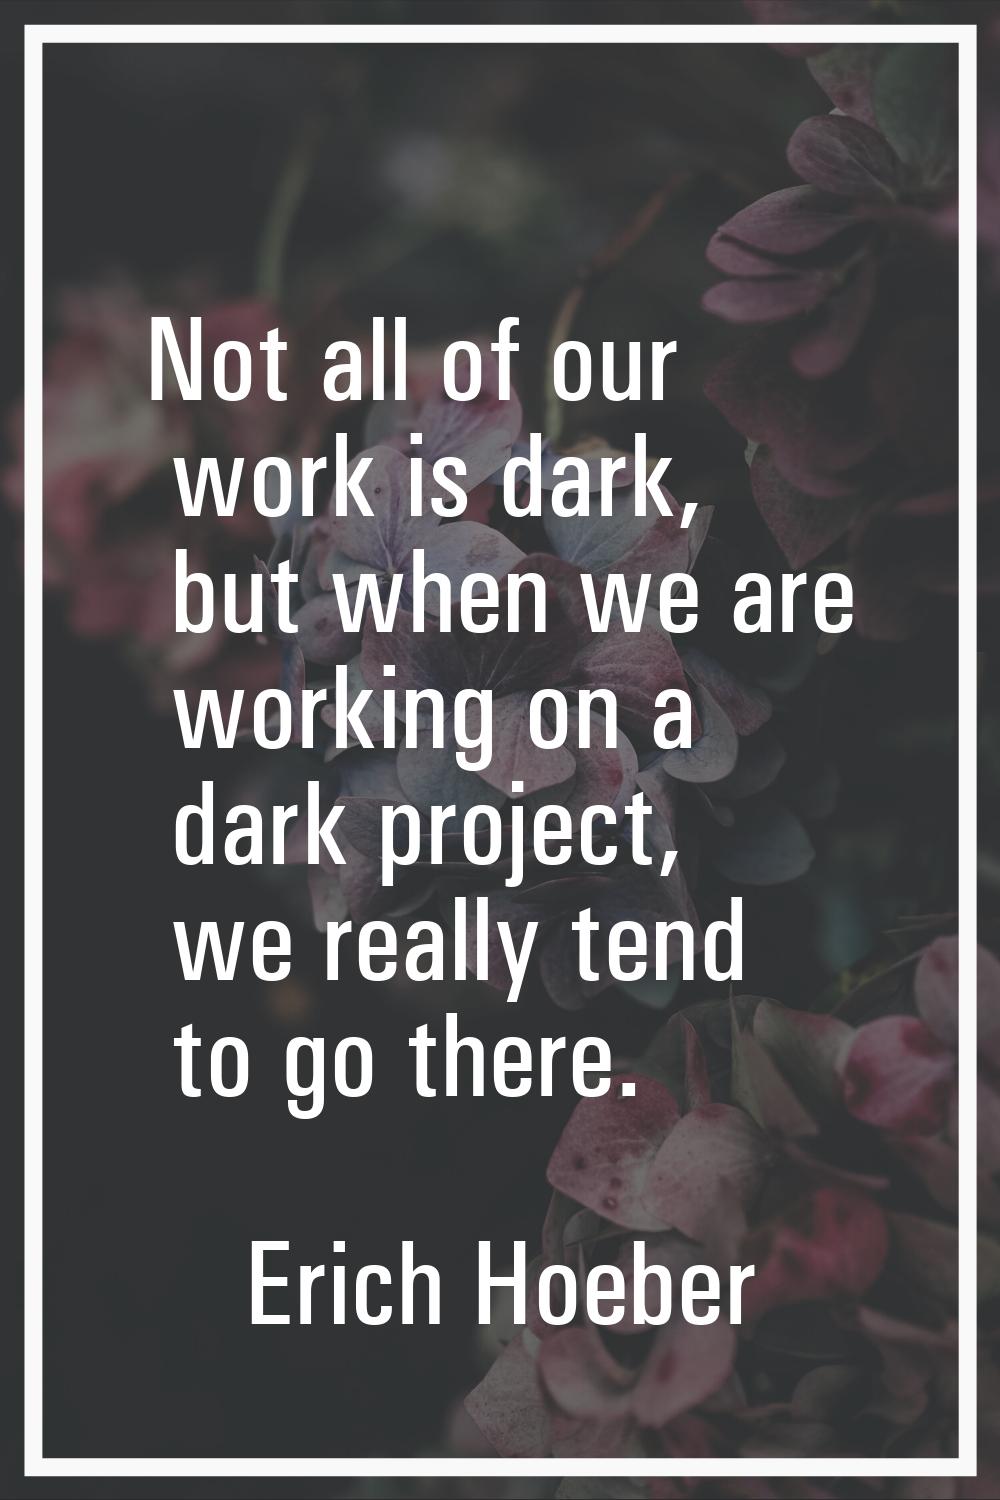 Not all of our work is dark, but when we are working on a dark project, we really tend to go there.